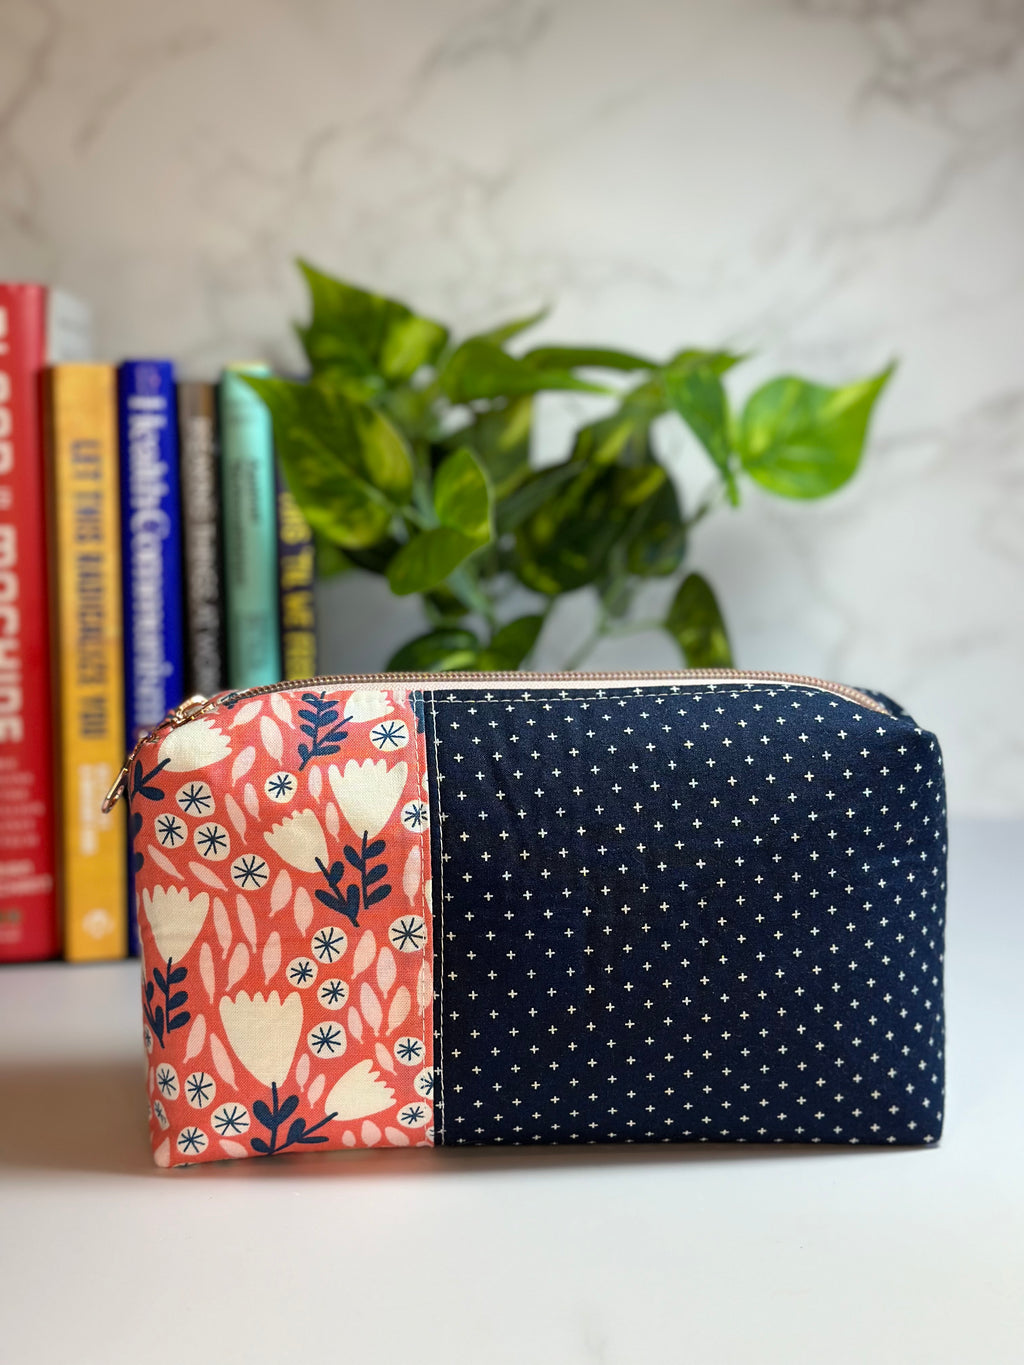 Boxy Pouch - C&s floral